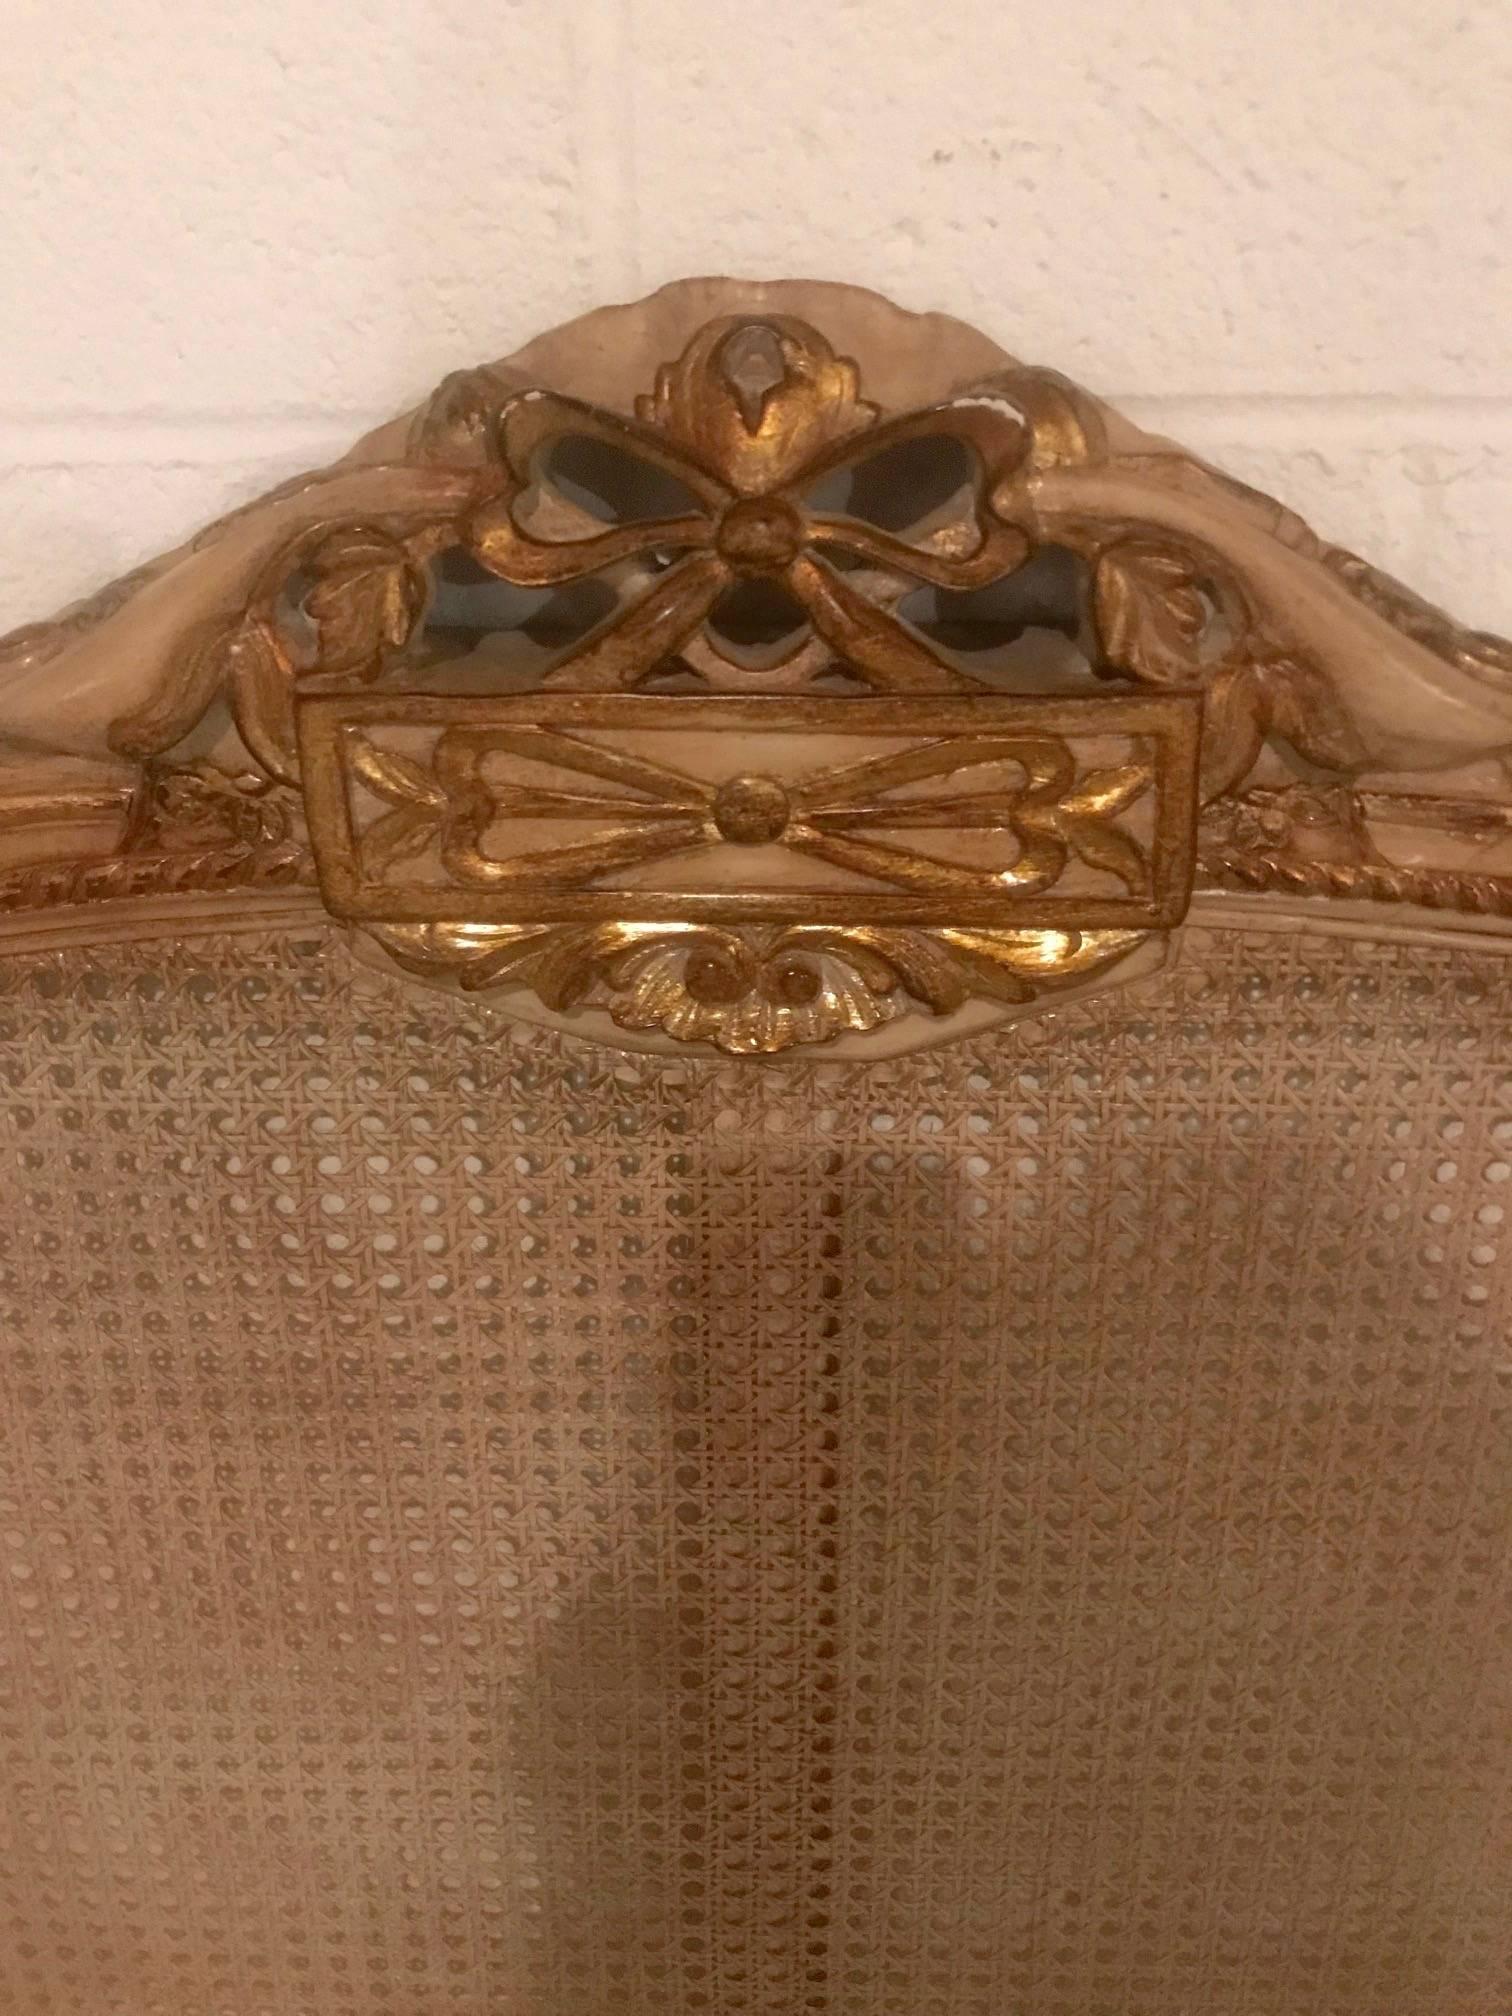 Lovely French style headboard painted cream with gold leaf embellishments, a bow at the top and pretty caning.